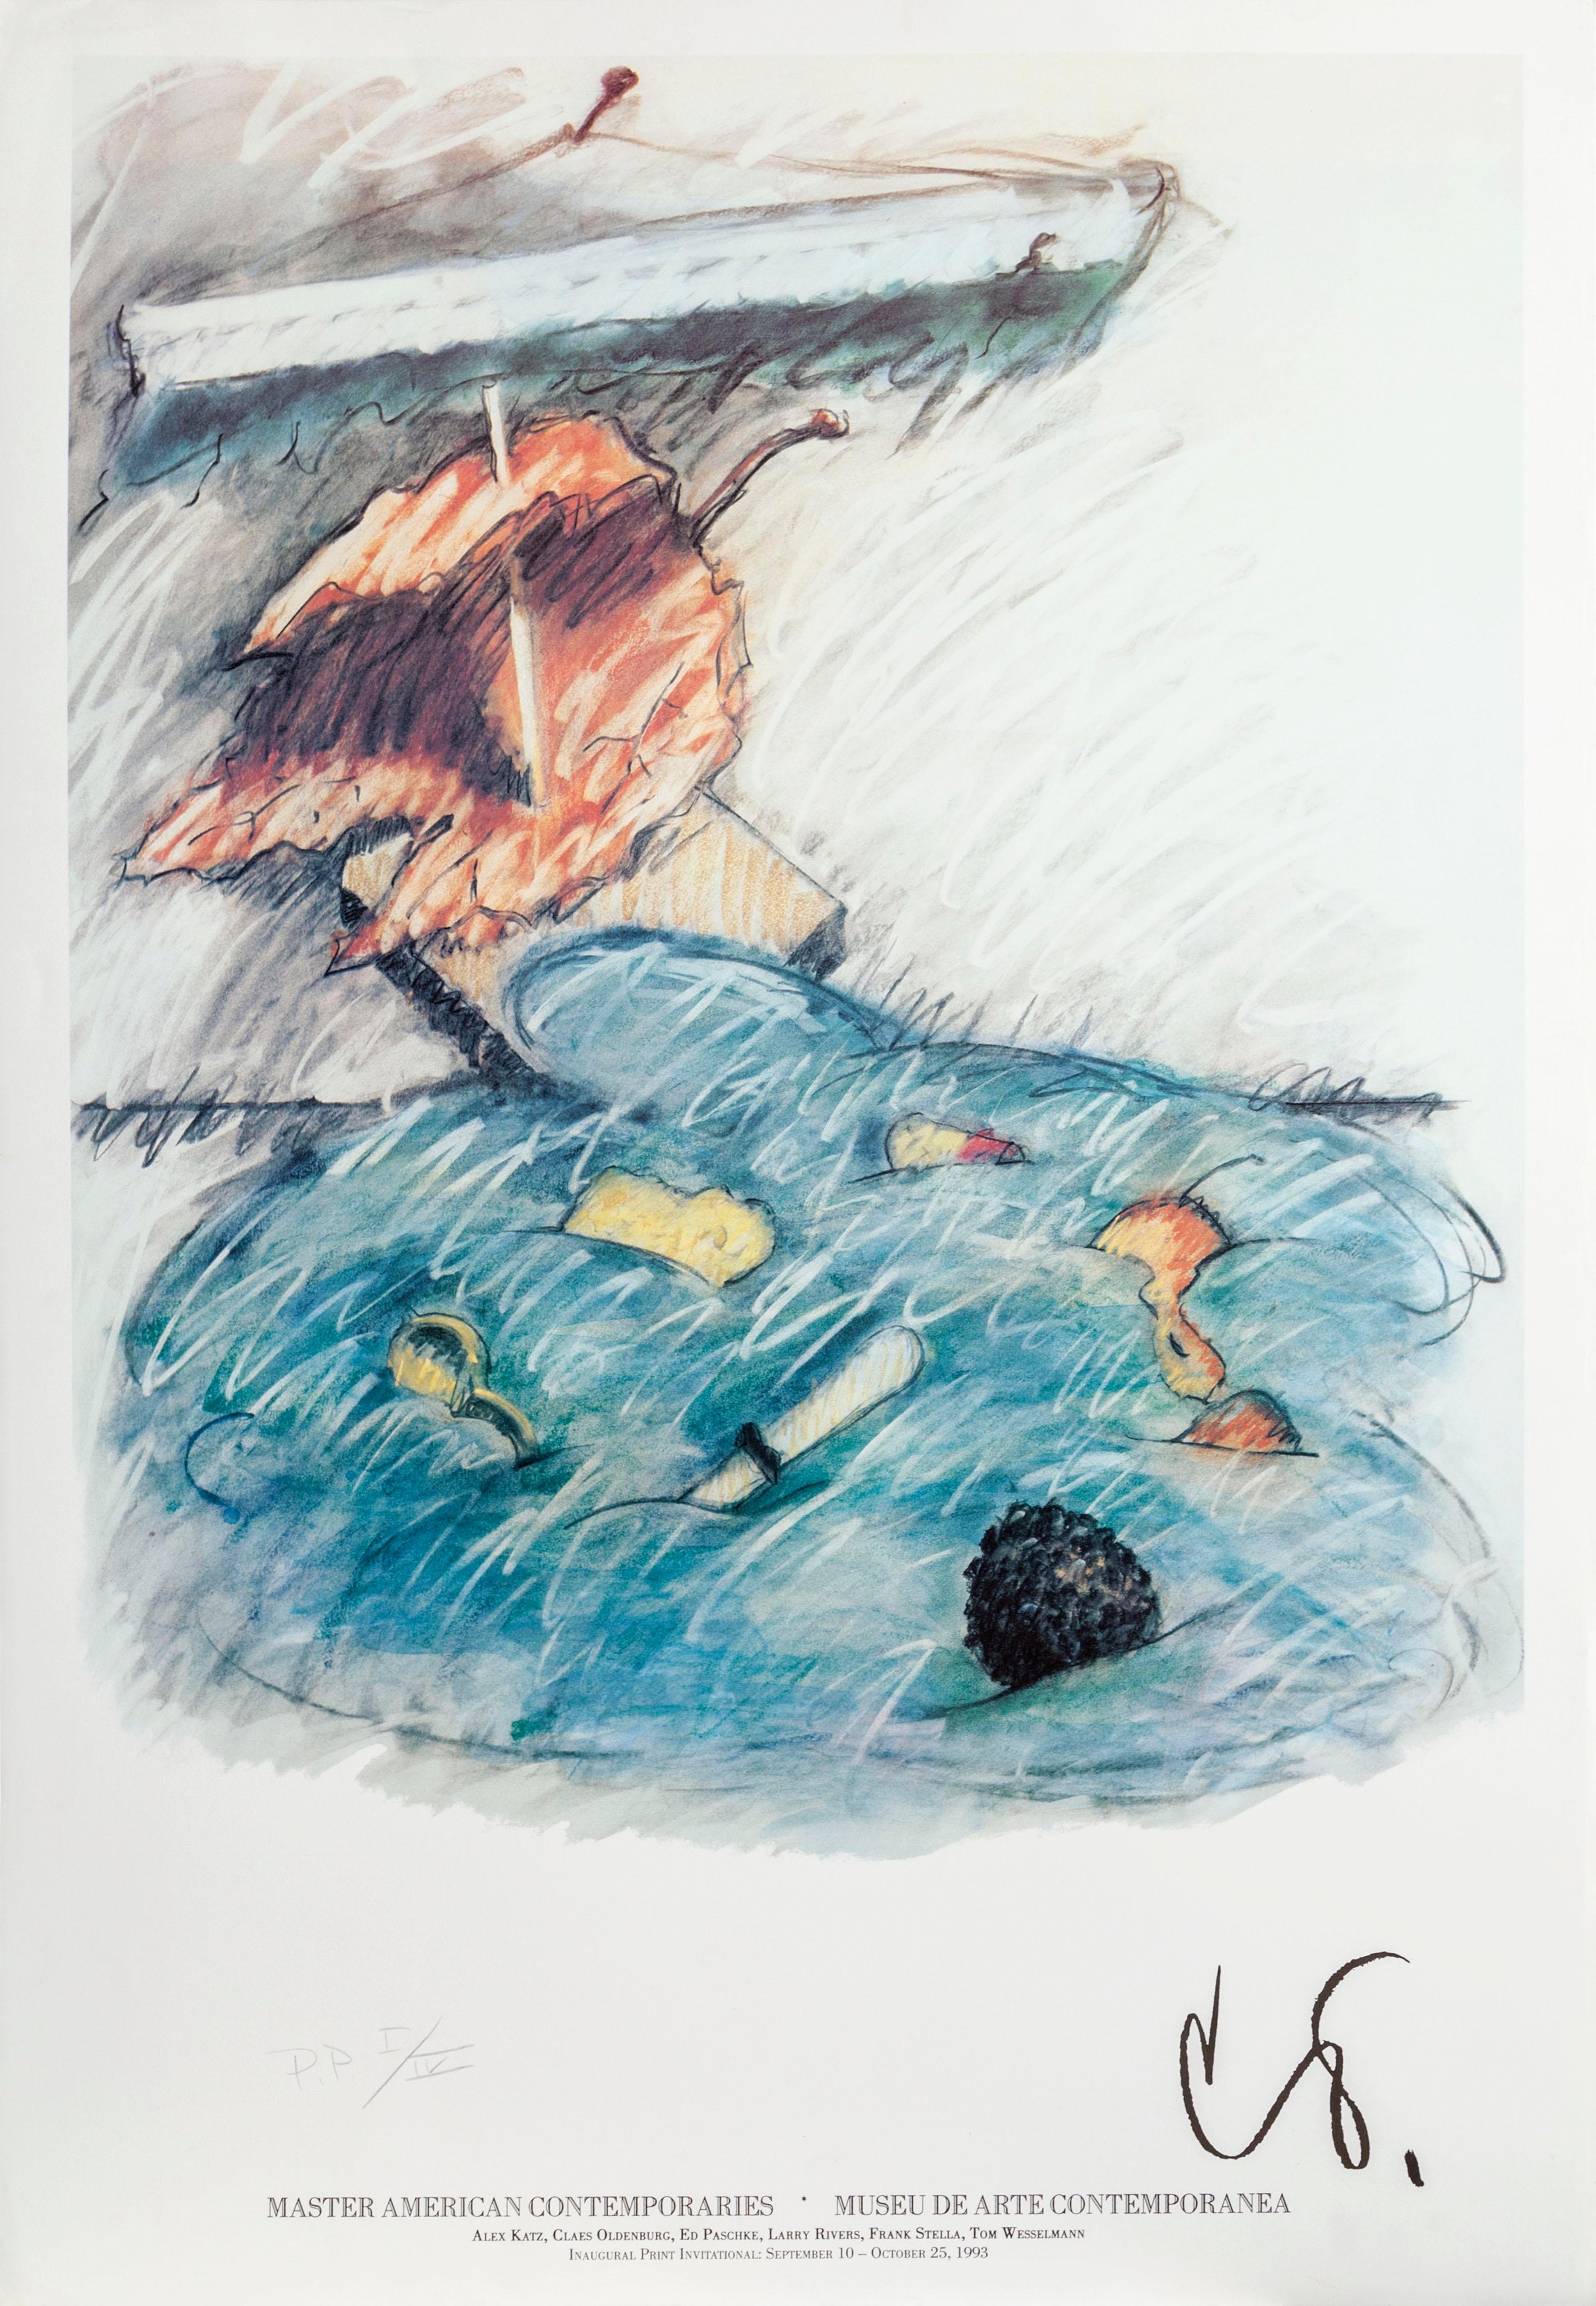 Claes Oldenburg Interior Print - Leaf Boat: Storm In the Studio for Museum of Contemporary Art in Sao Paolo